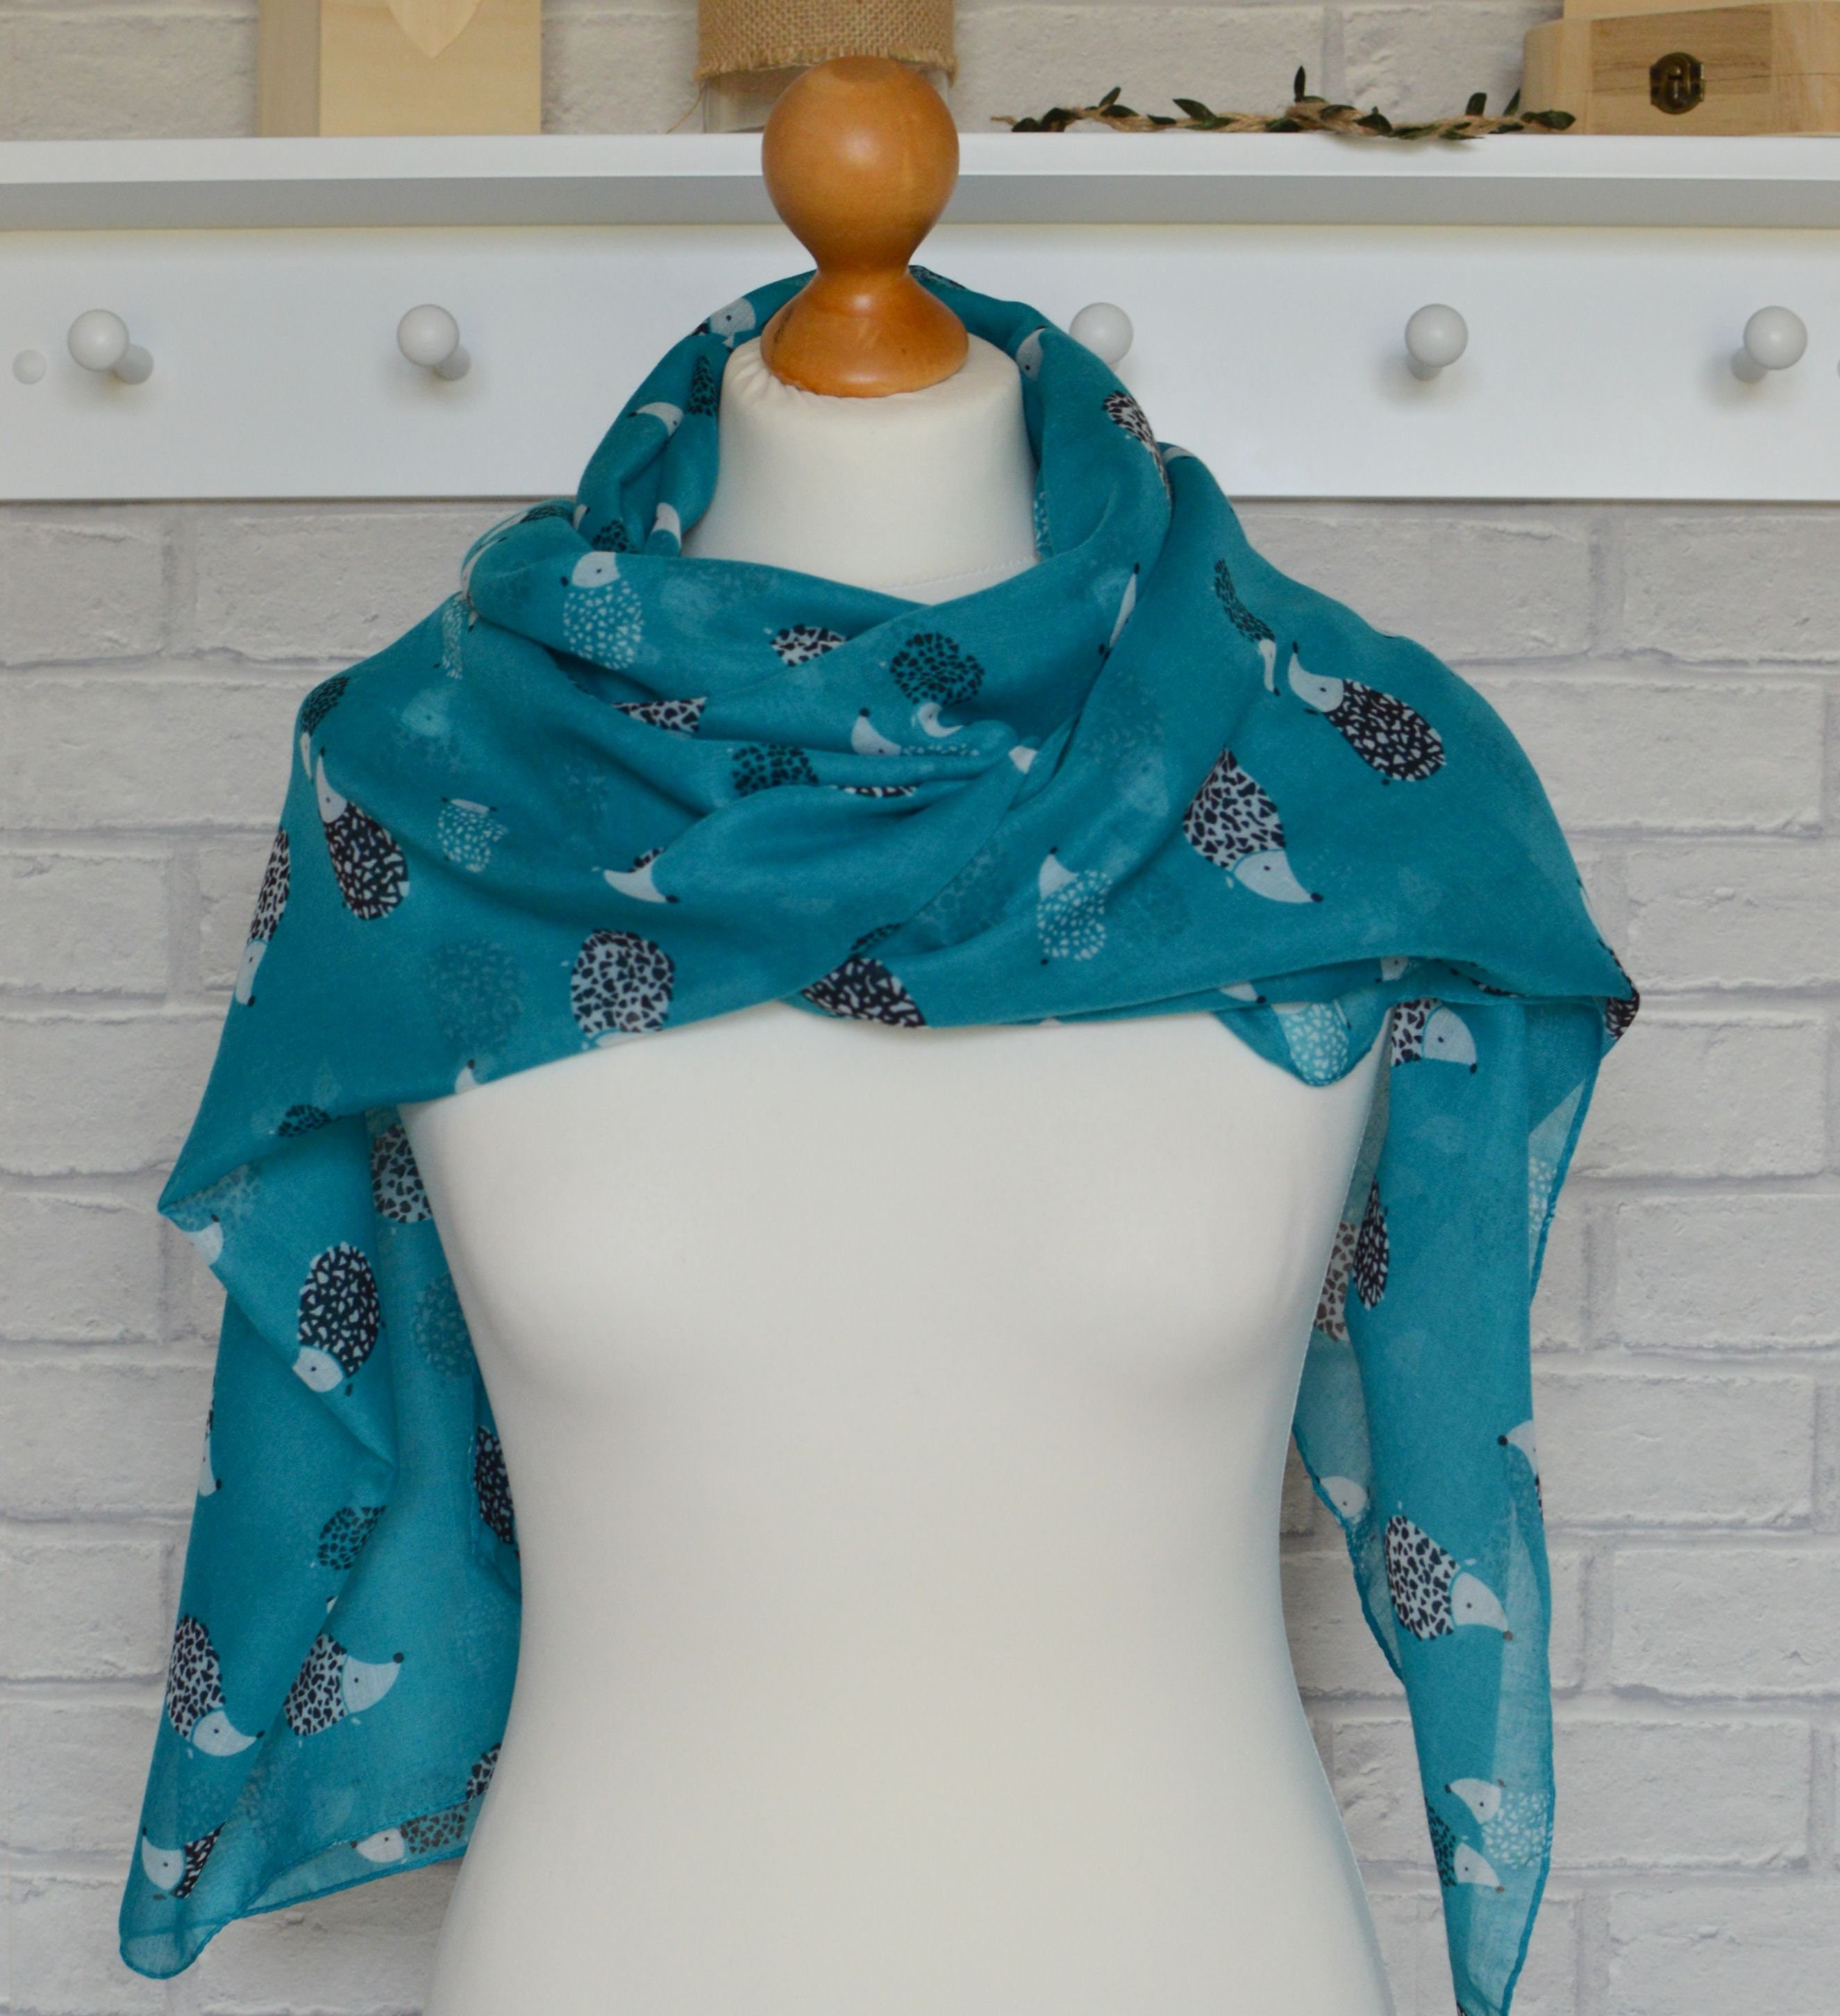 Hedgehogs Scarf Turquoise Blue Green Large Soft Animal Print Wrap